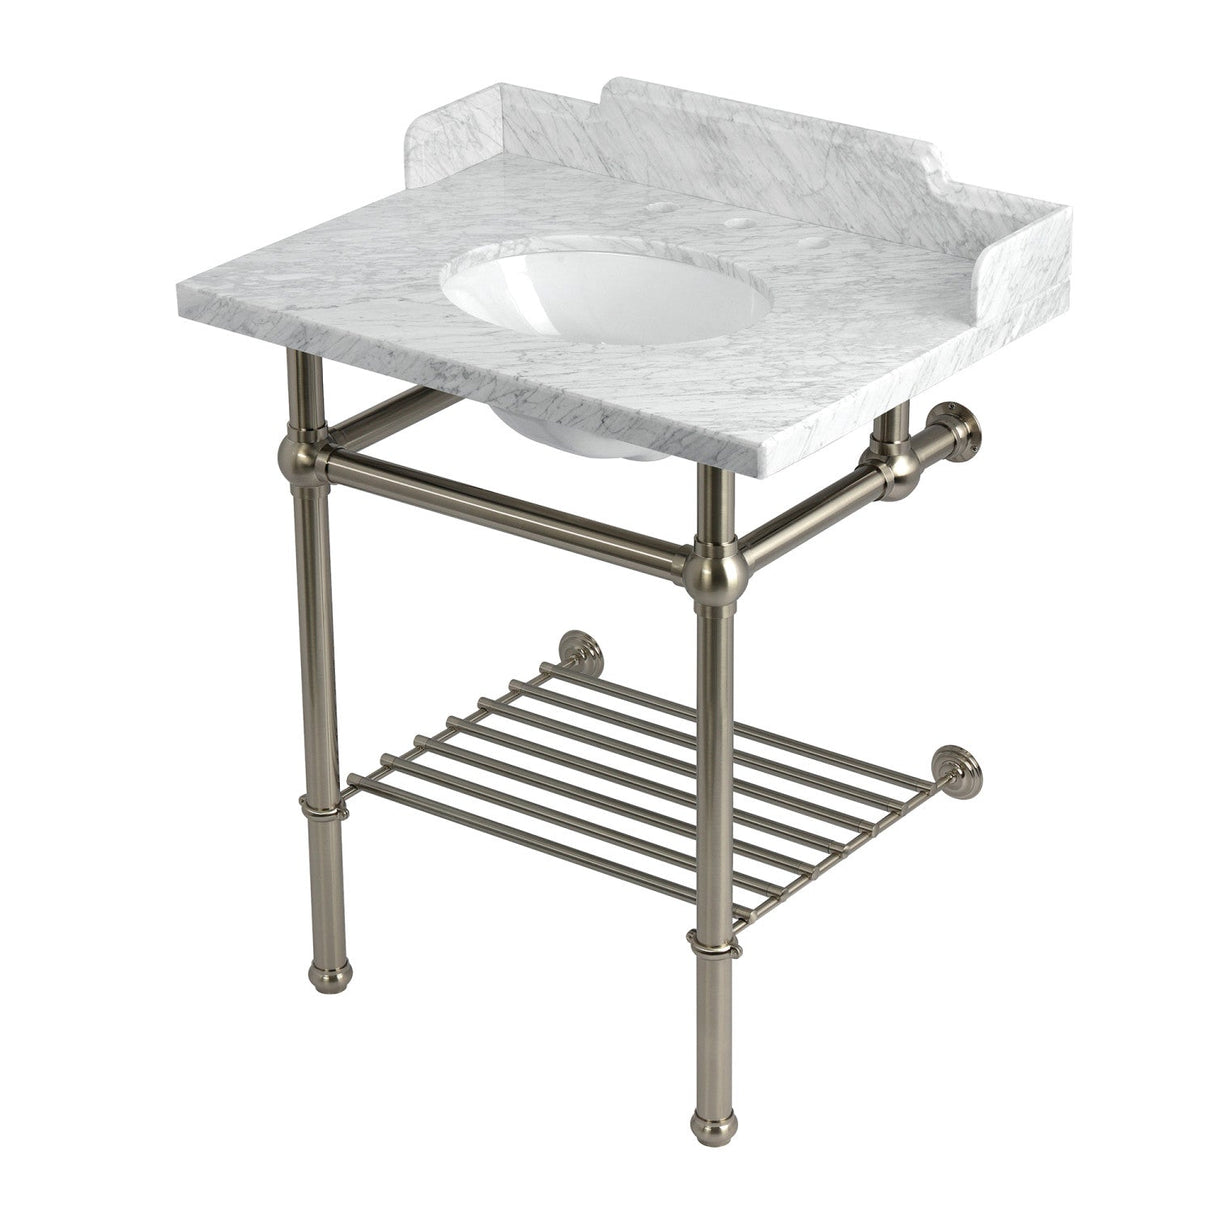 Pemberton LMS30MBB8 30-Inch Console Sink with Brass Legs (8-Inch, 3 Hole), Marble White/Brushed Nickel